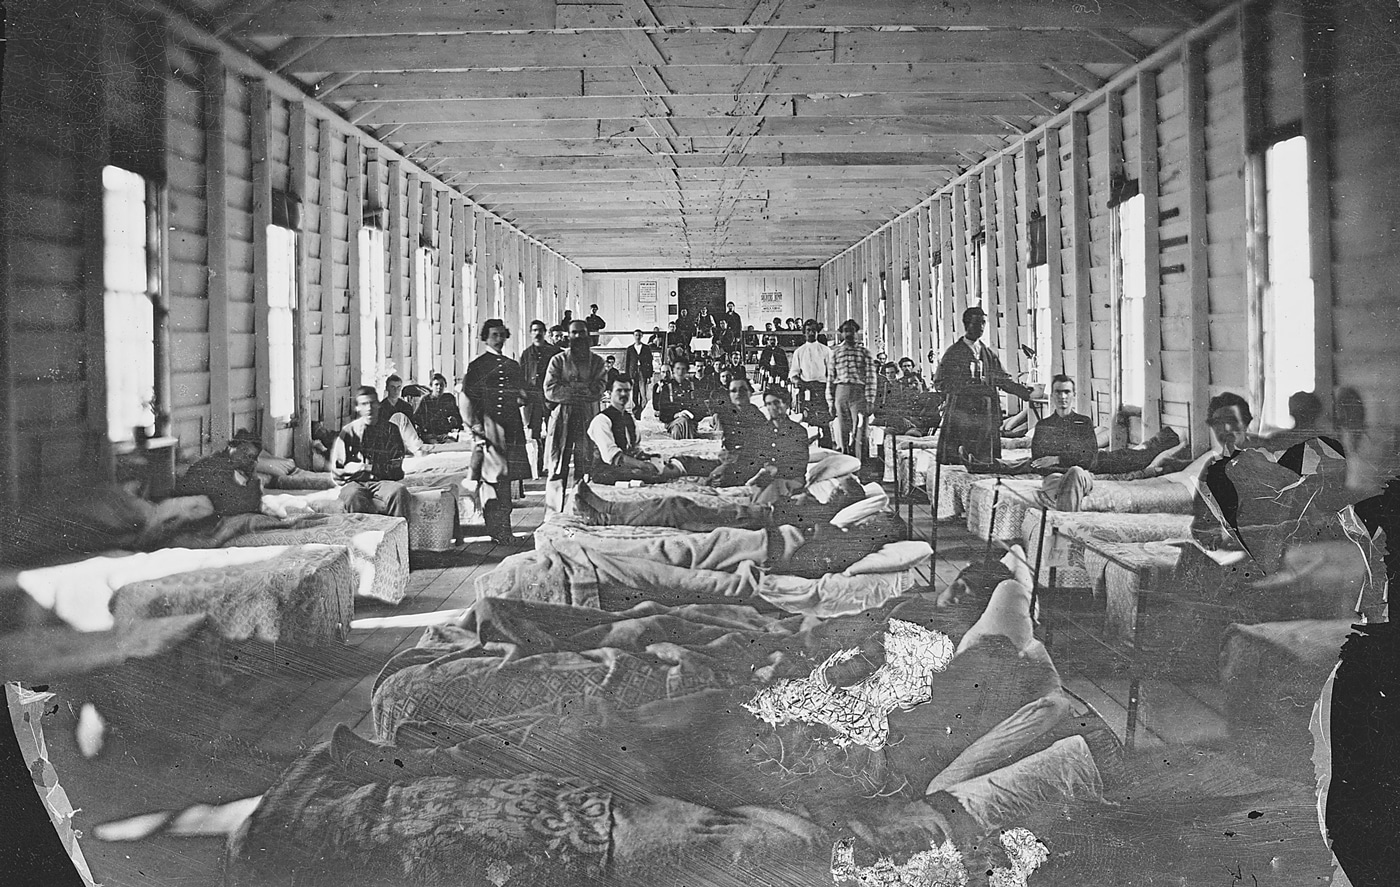 wounded soldiers in a hospital during Civil War